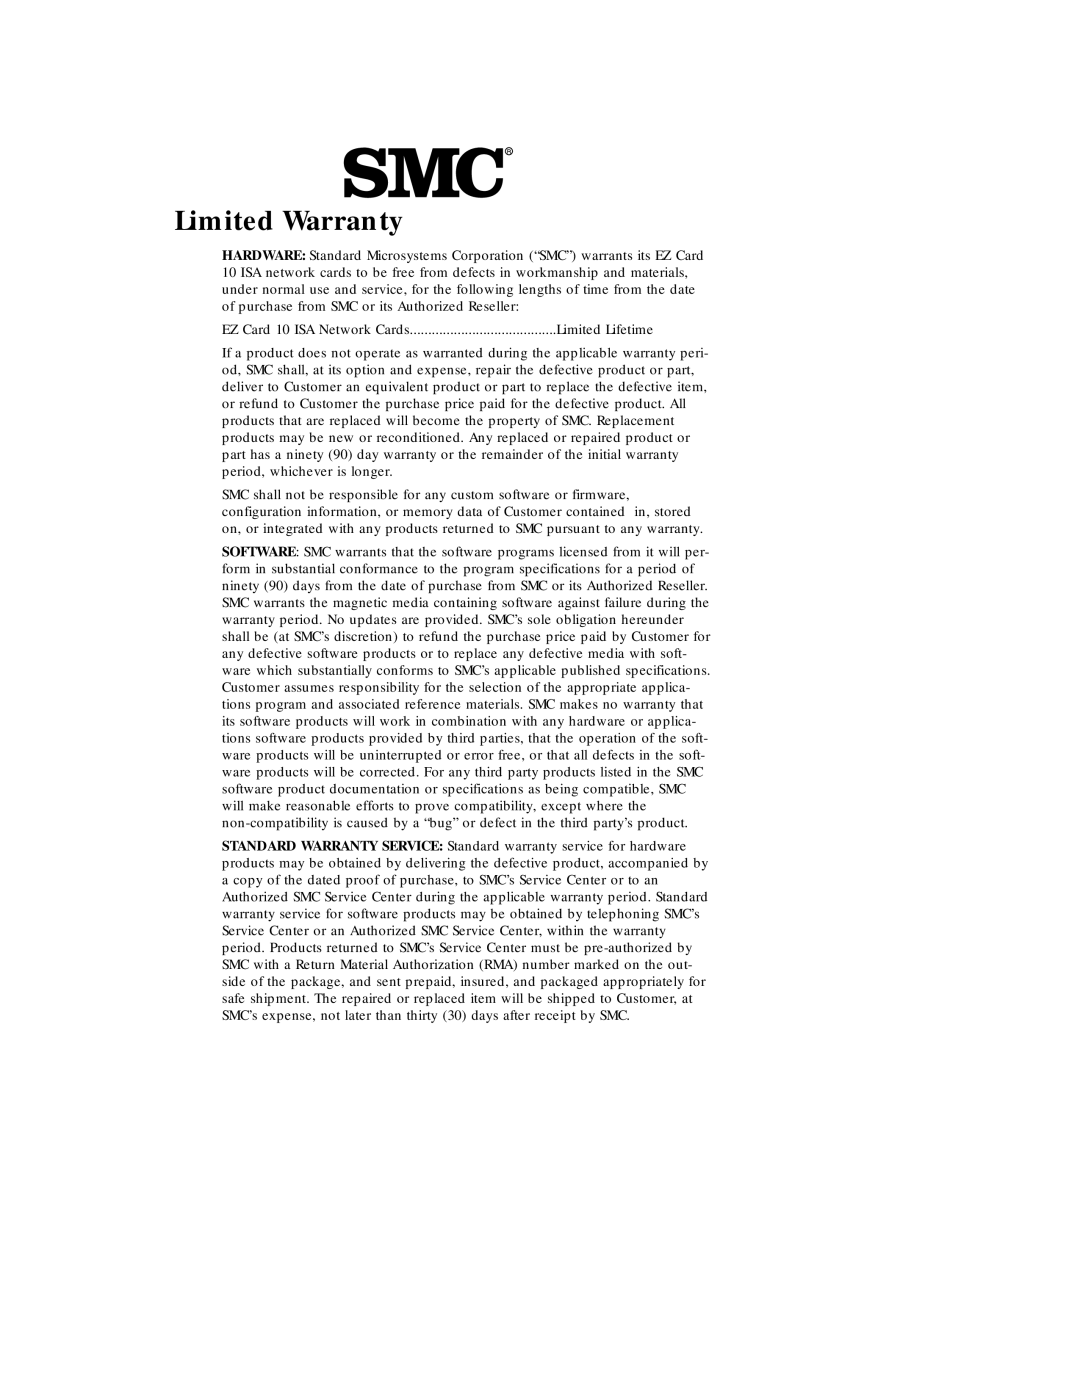 SMC Networks Ethernet ISA Network Cards manual Limited Warranty 